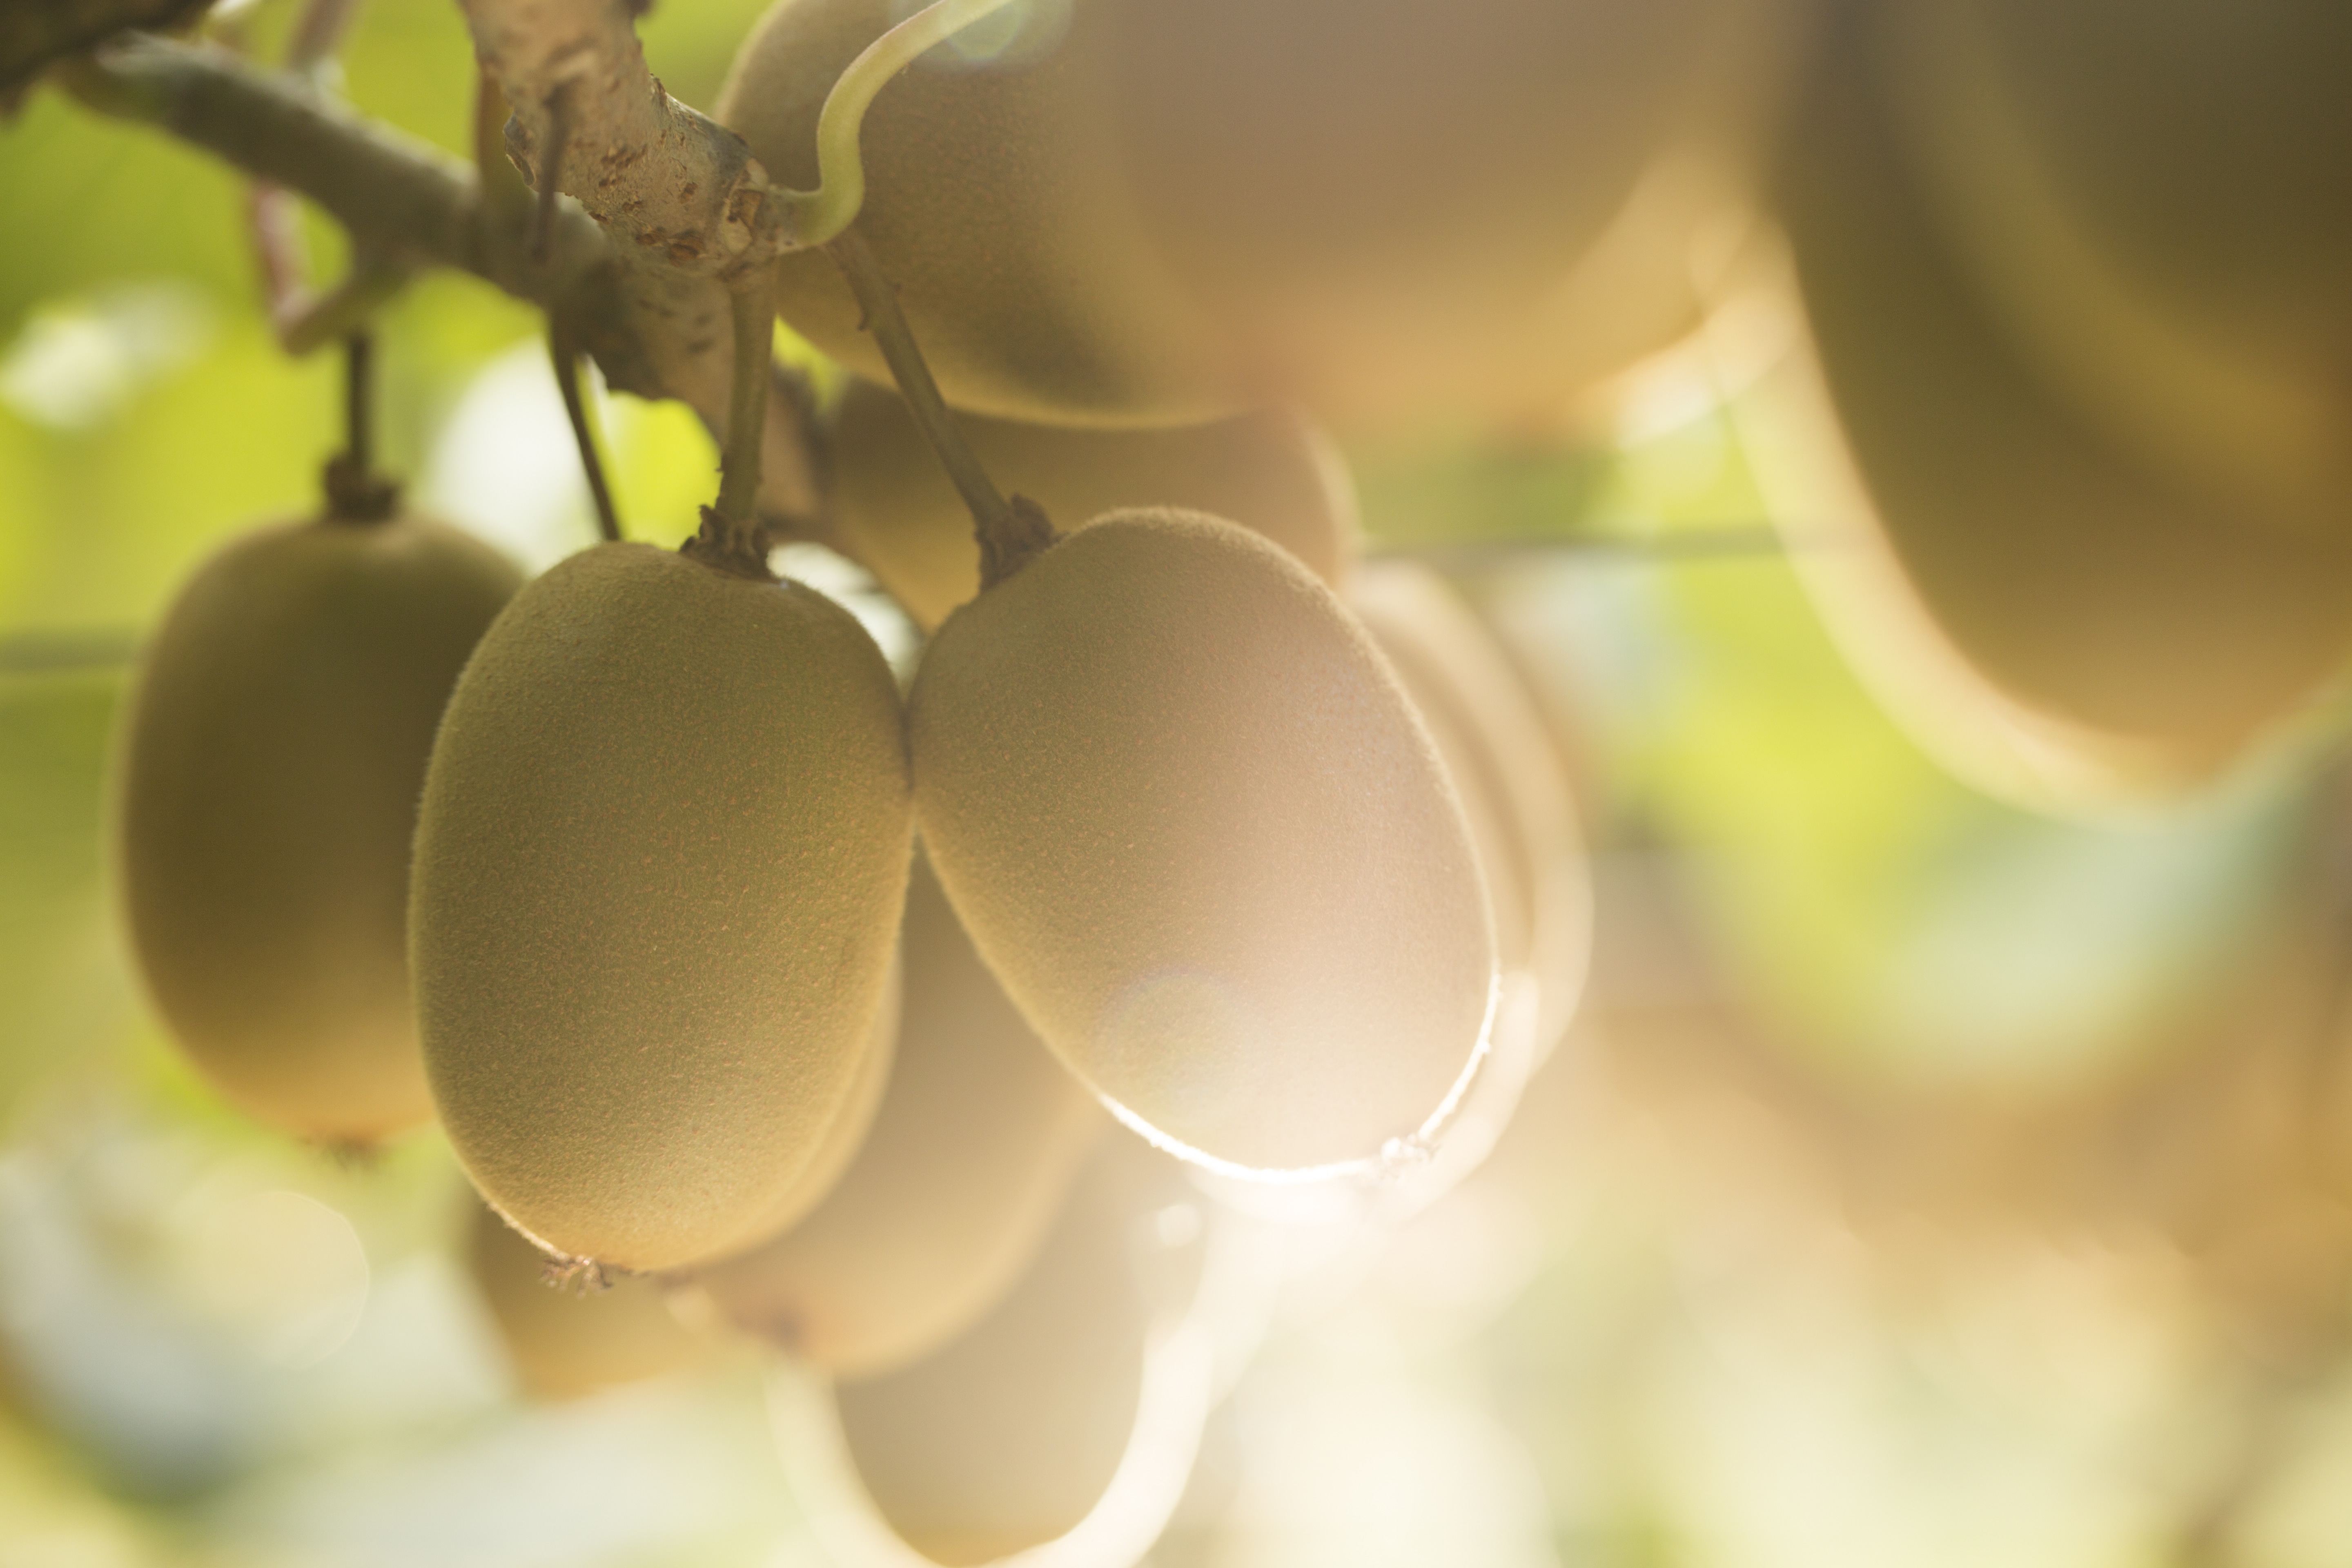 Zespri rolls out SAP technology to support its people, processes and growers